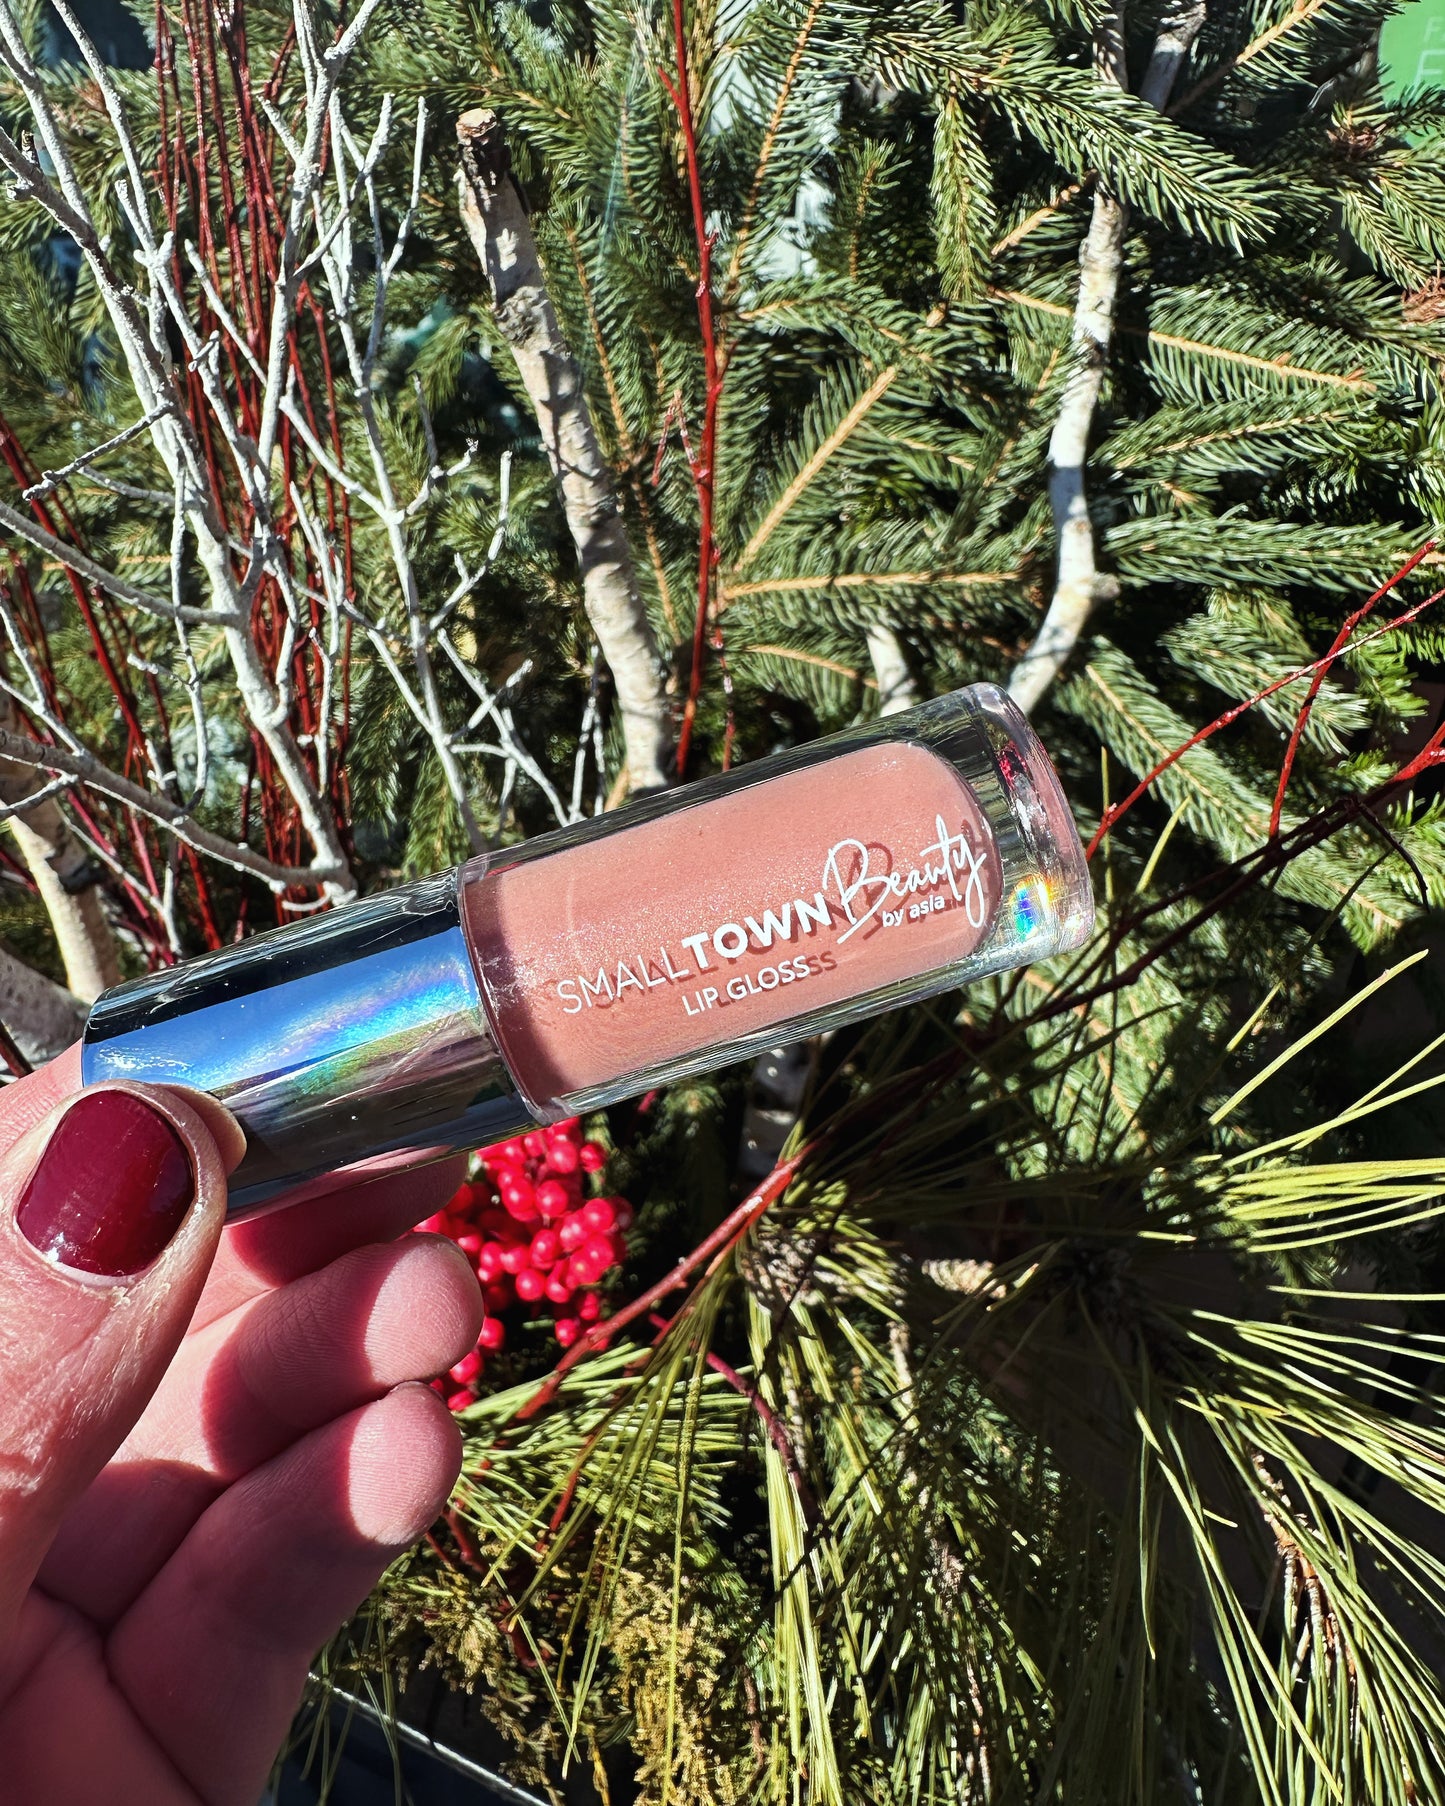 Blush Roots Lip Gloss (Small Town Beauty by Asia)